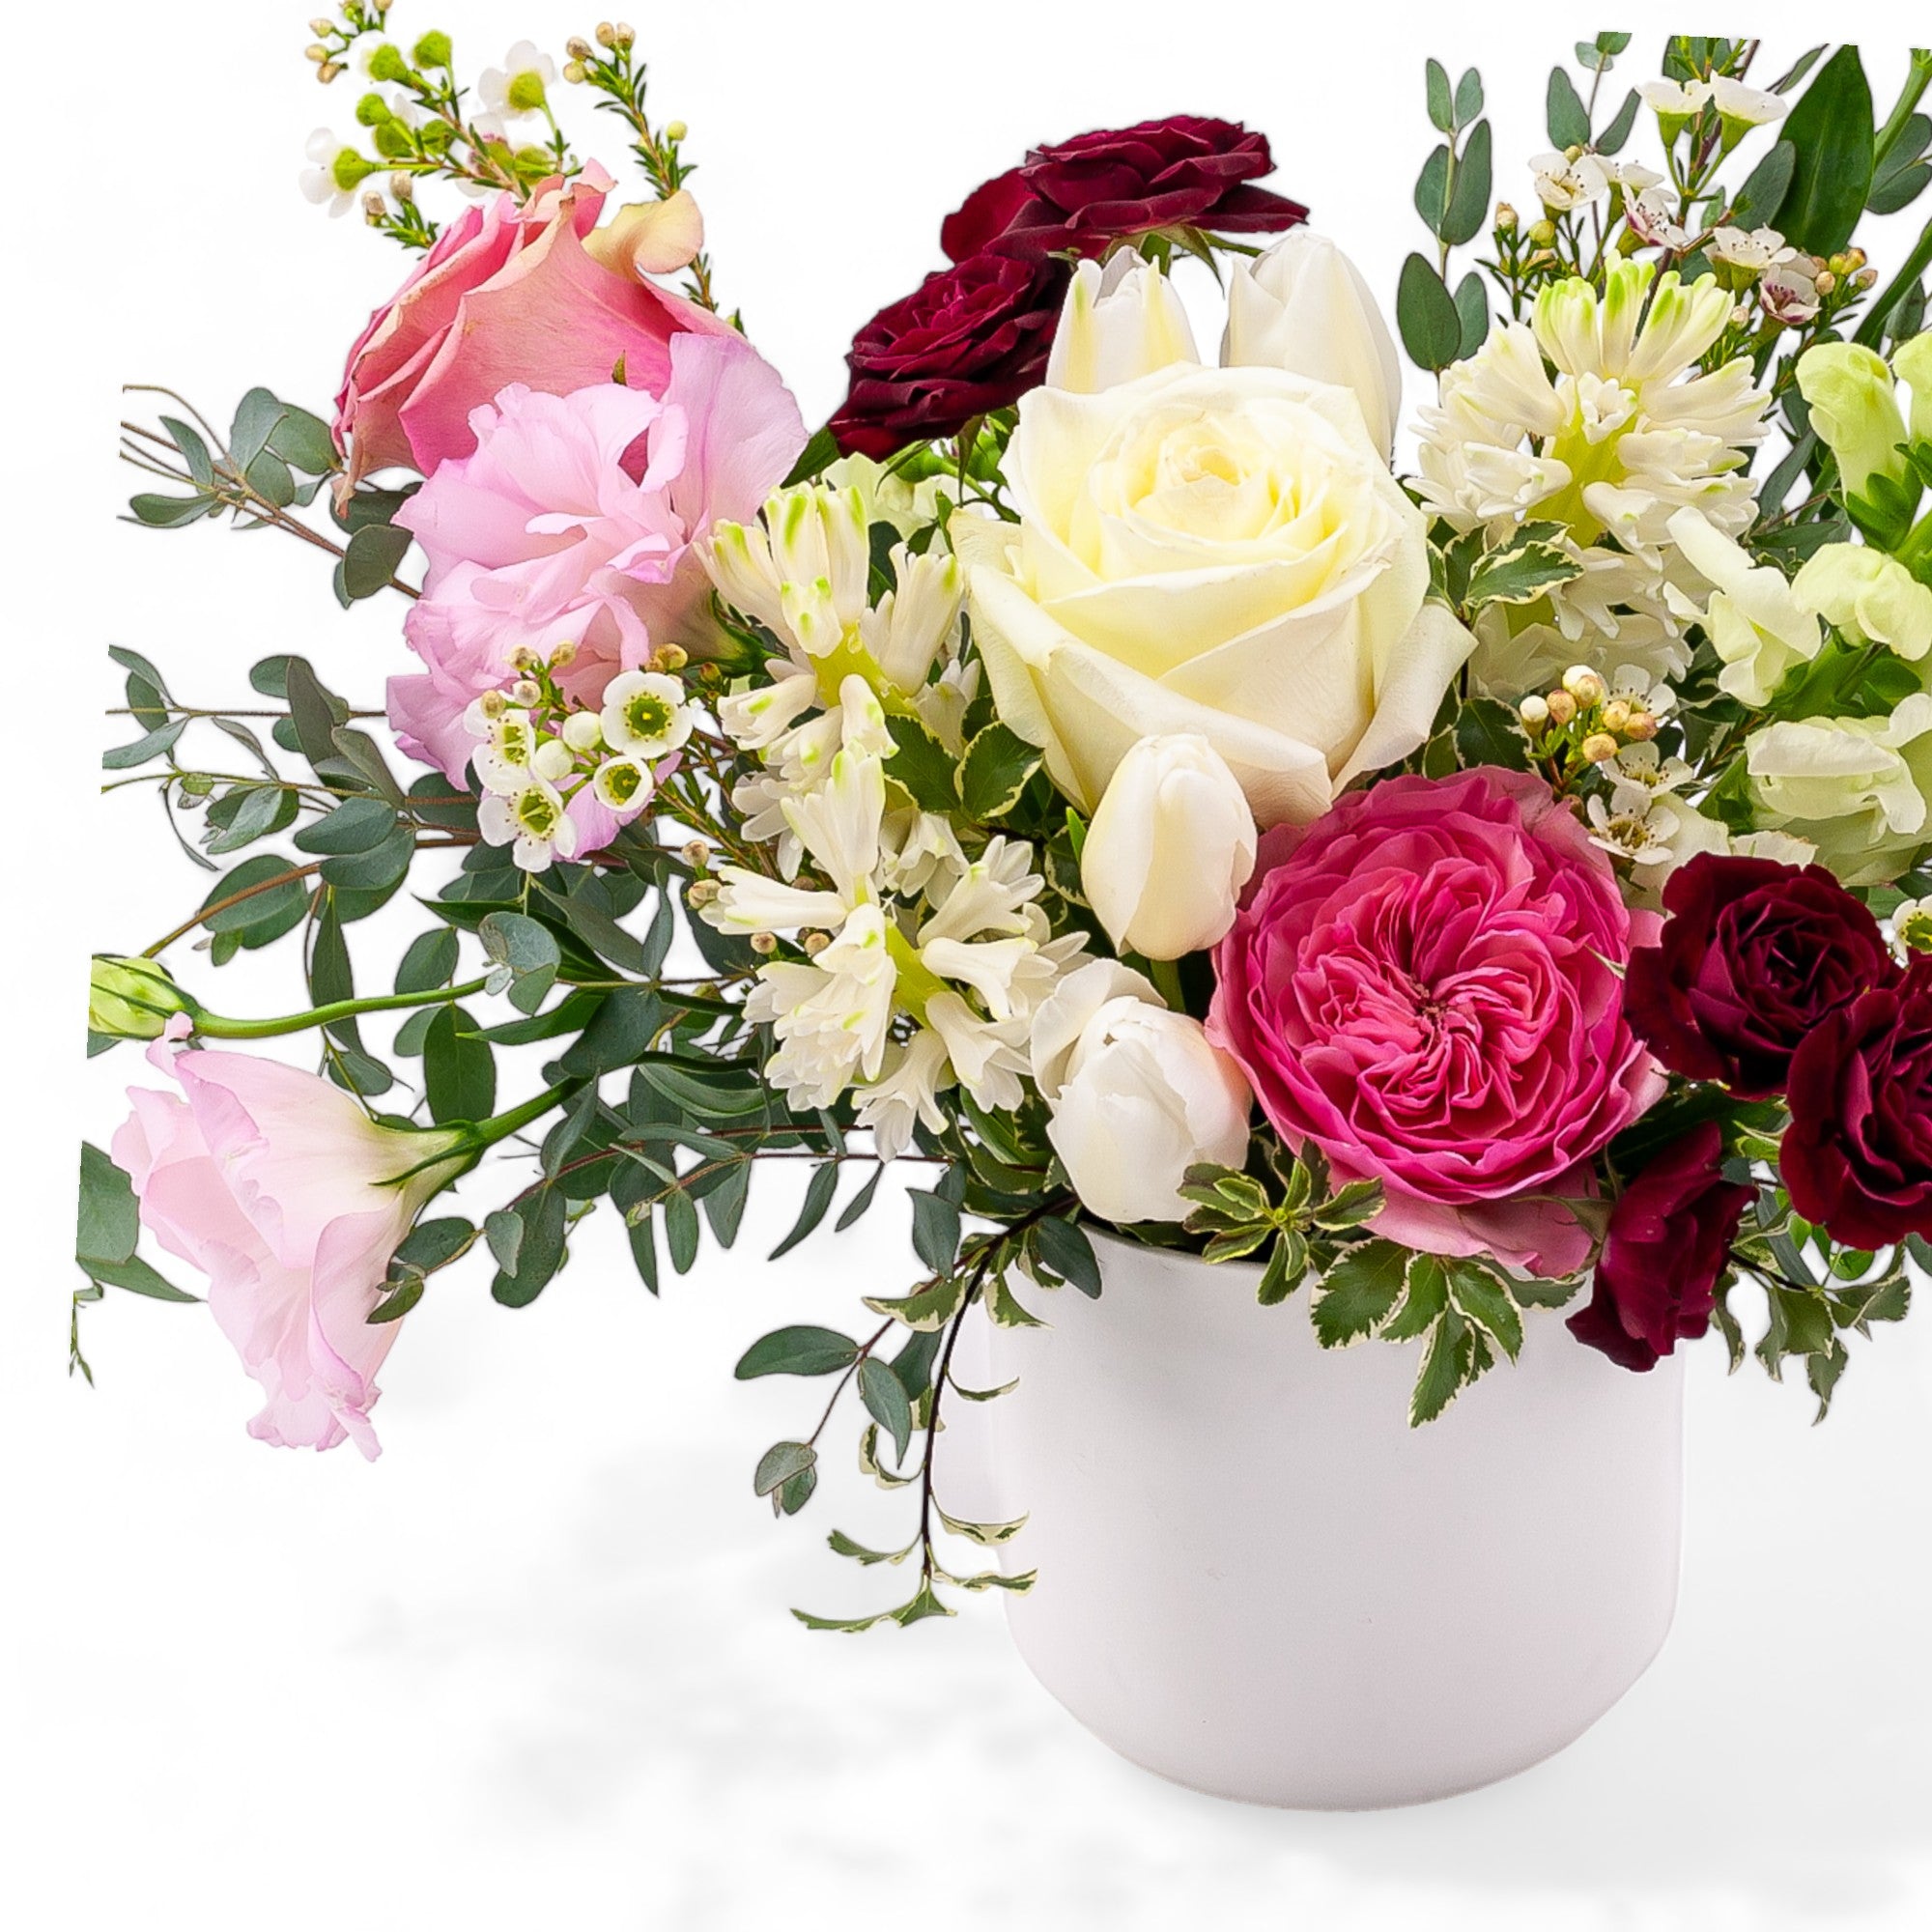 Blushing Blooms Floral from Green Fresh Florals + Plants